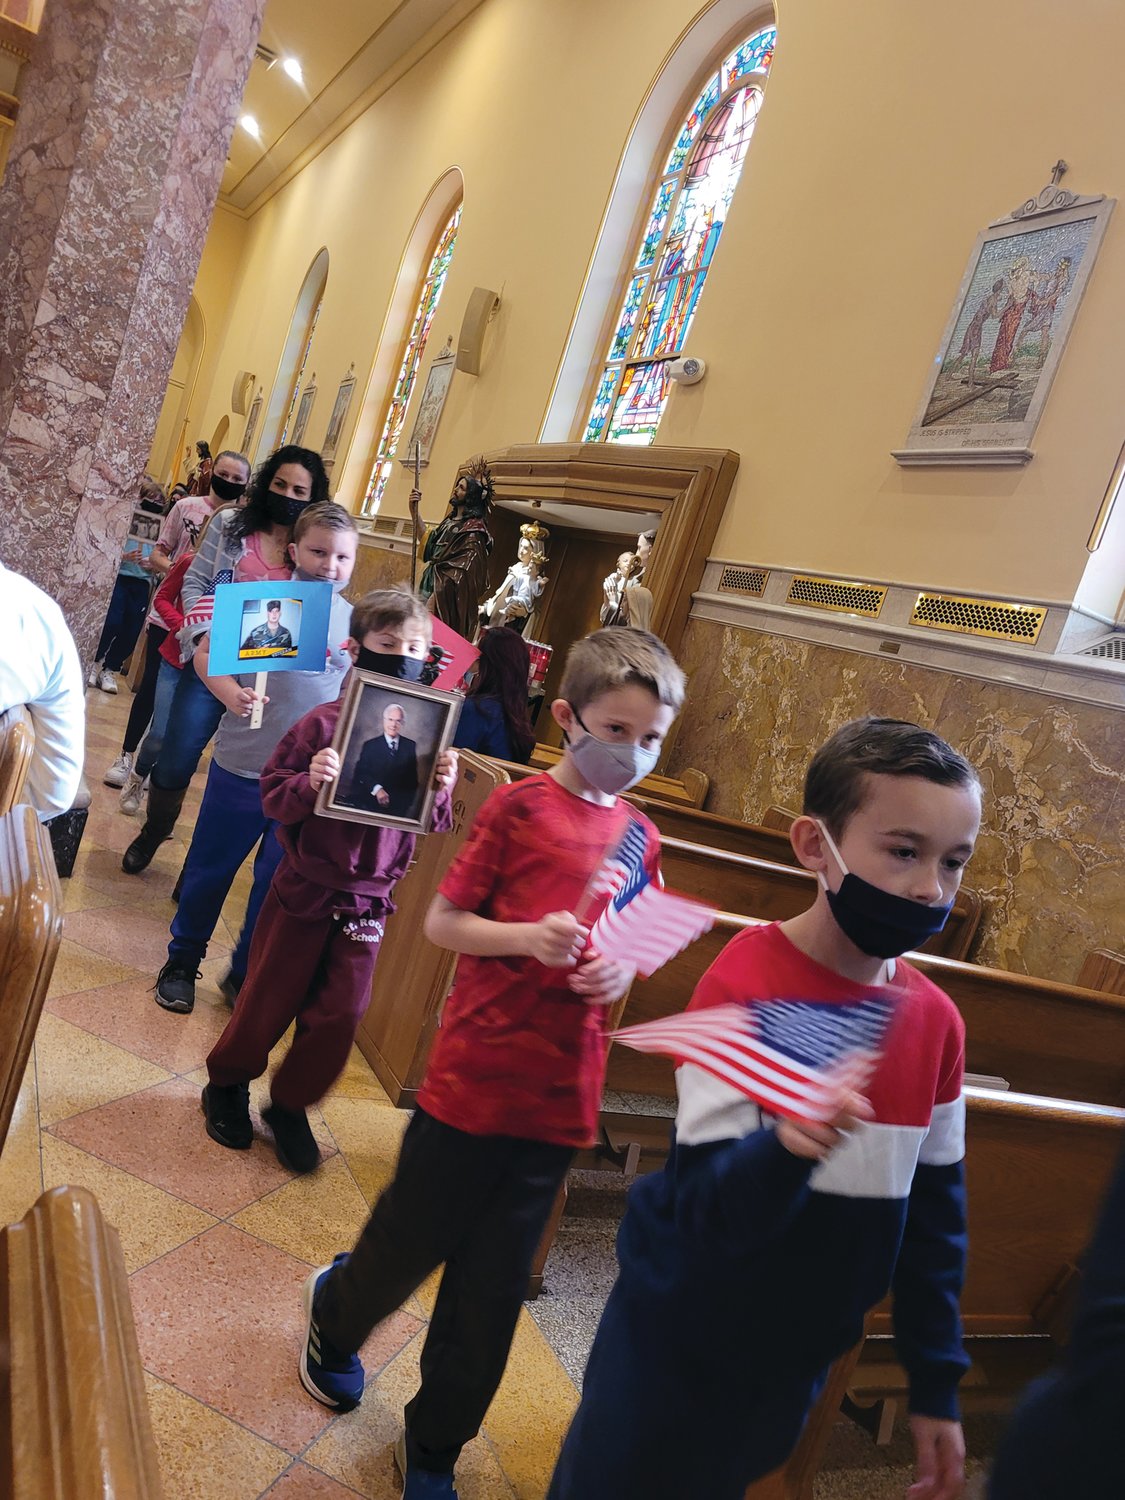 The students of St. Rocco School in Johnston walked down the church isles holding photographs of veterans they loved. The school held a prayer service for veterans on Wednesday morning at St. Rocco Church.